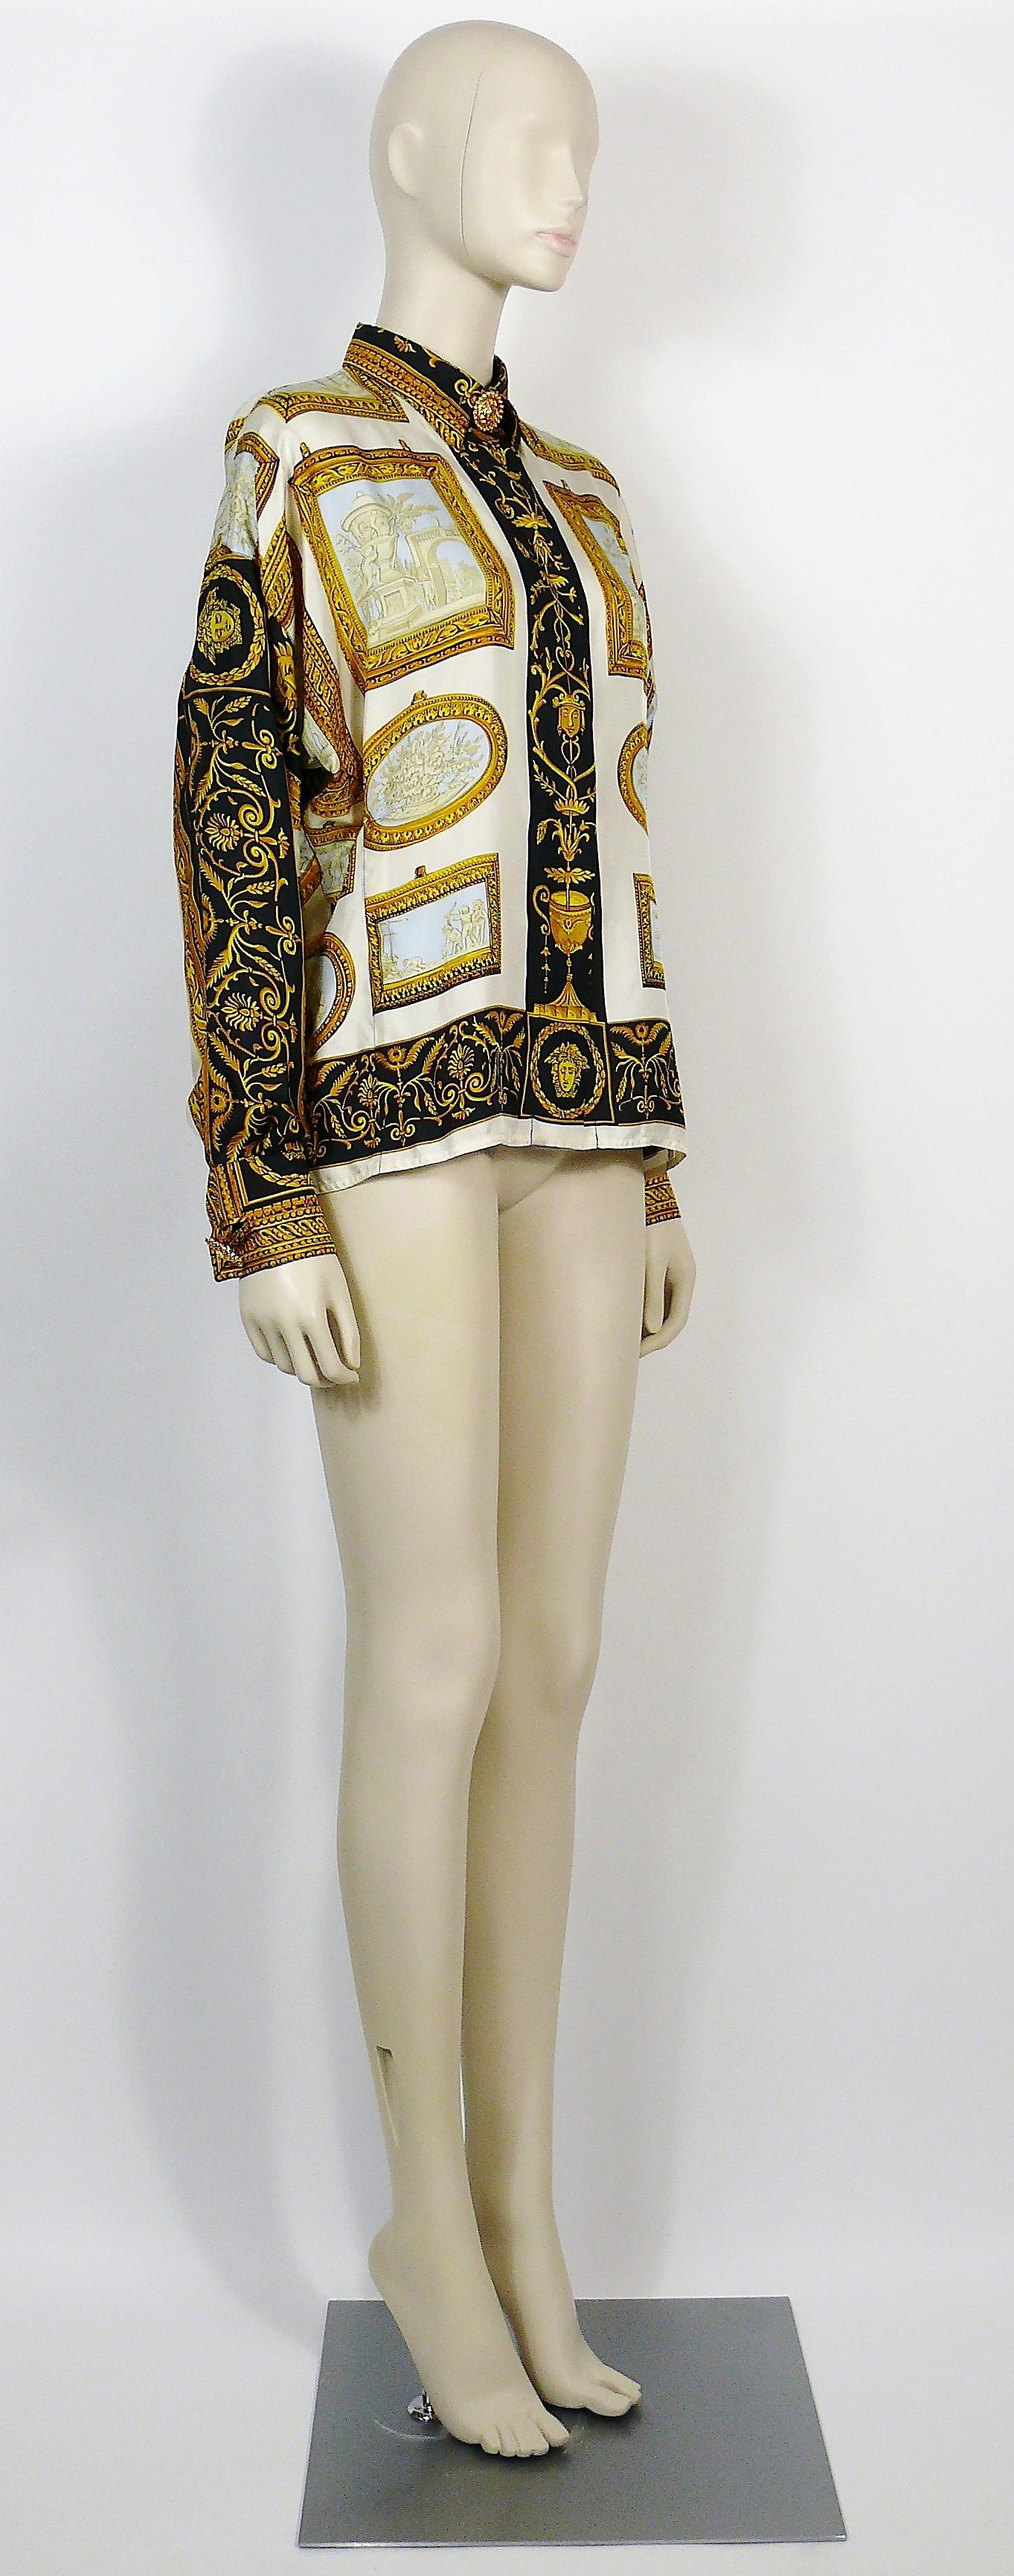 GIANNI VERSACE COUTURE vintage silk blouse featuring a framed Wedgwood jasper plaques print on an off-white background, adorned with gold color Neoclassical ornaments.

Gold toned Medusa buttons on collar and cuffs.
Hidden front buttoning.

Label